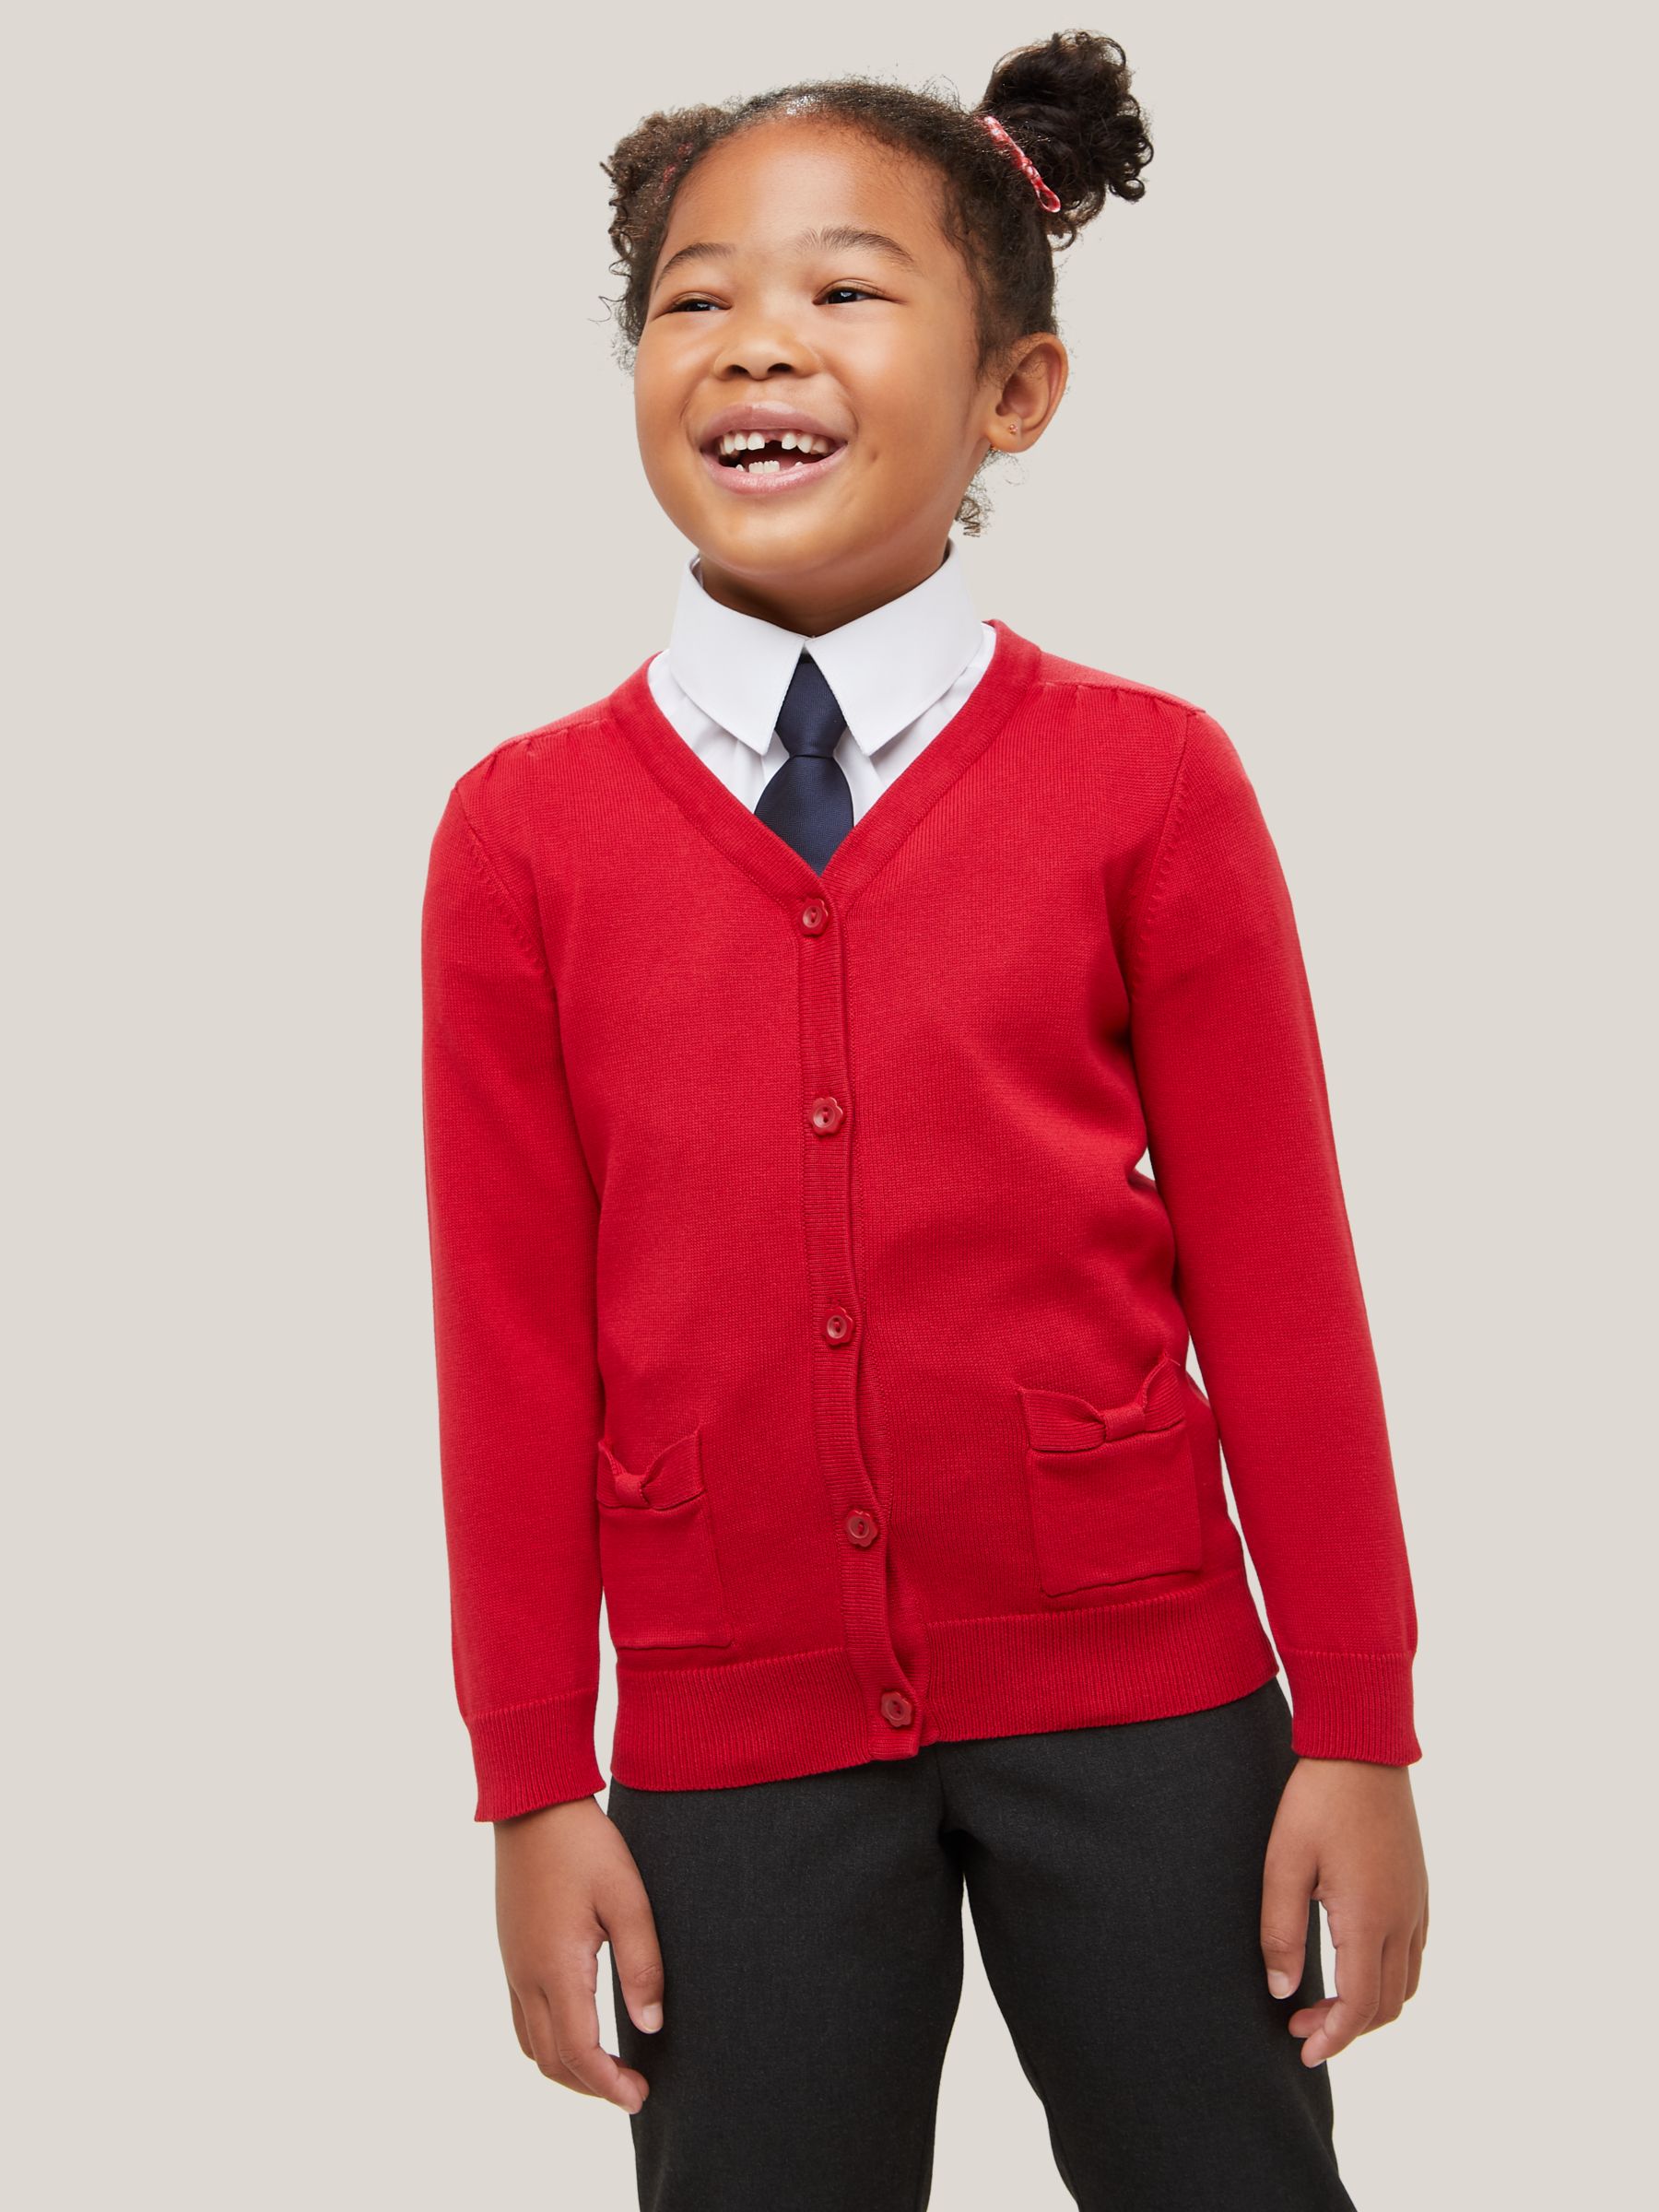 John Lewis Girls' Cotton Double Pocket Easy Care Cardigan, Red, 3-4 years